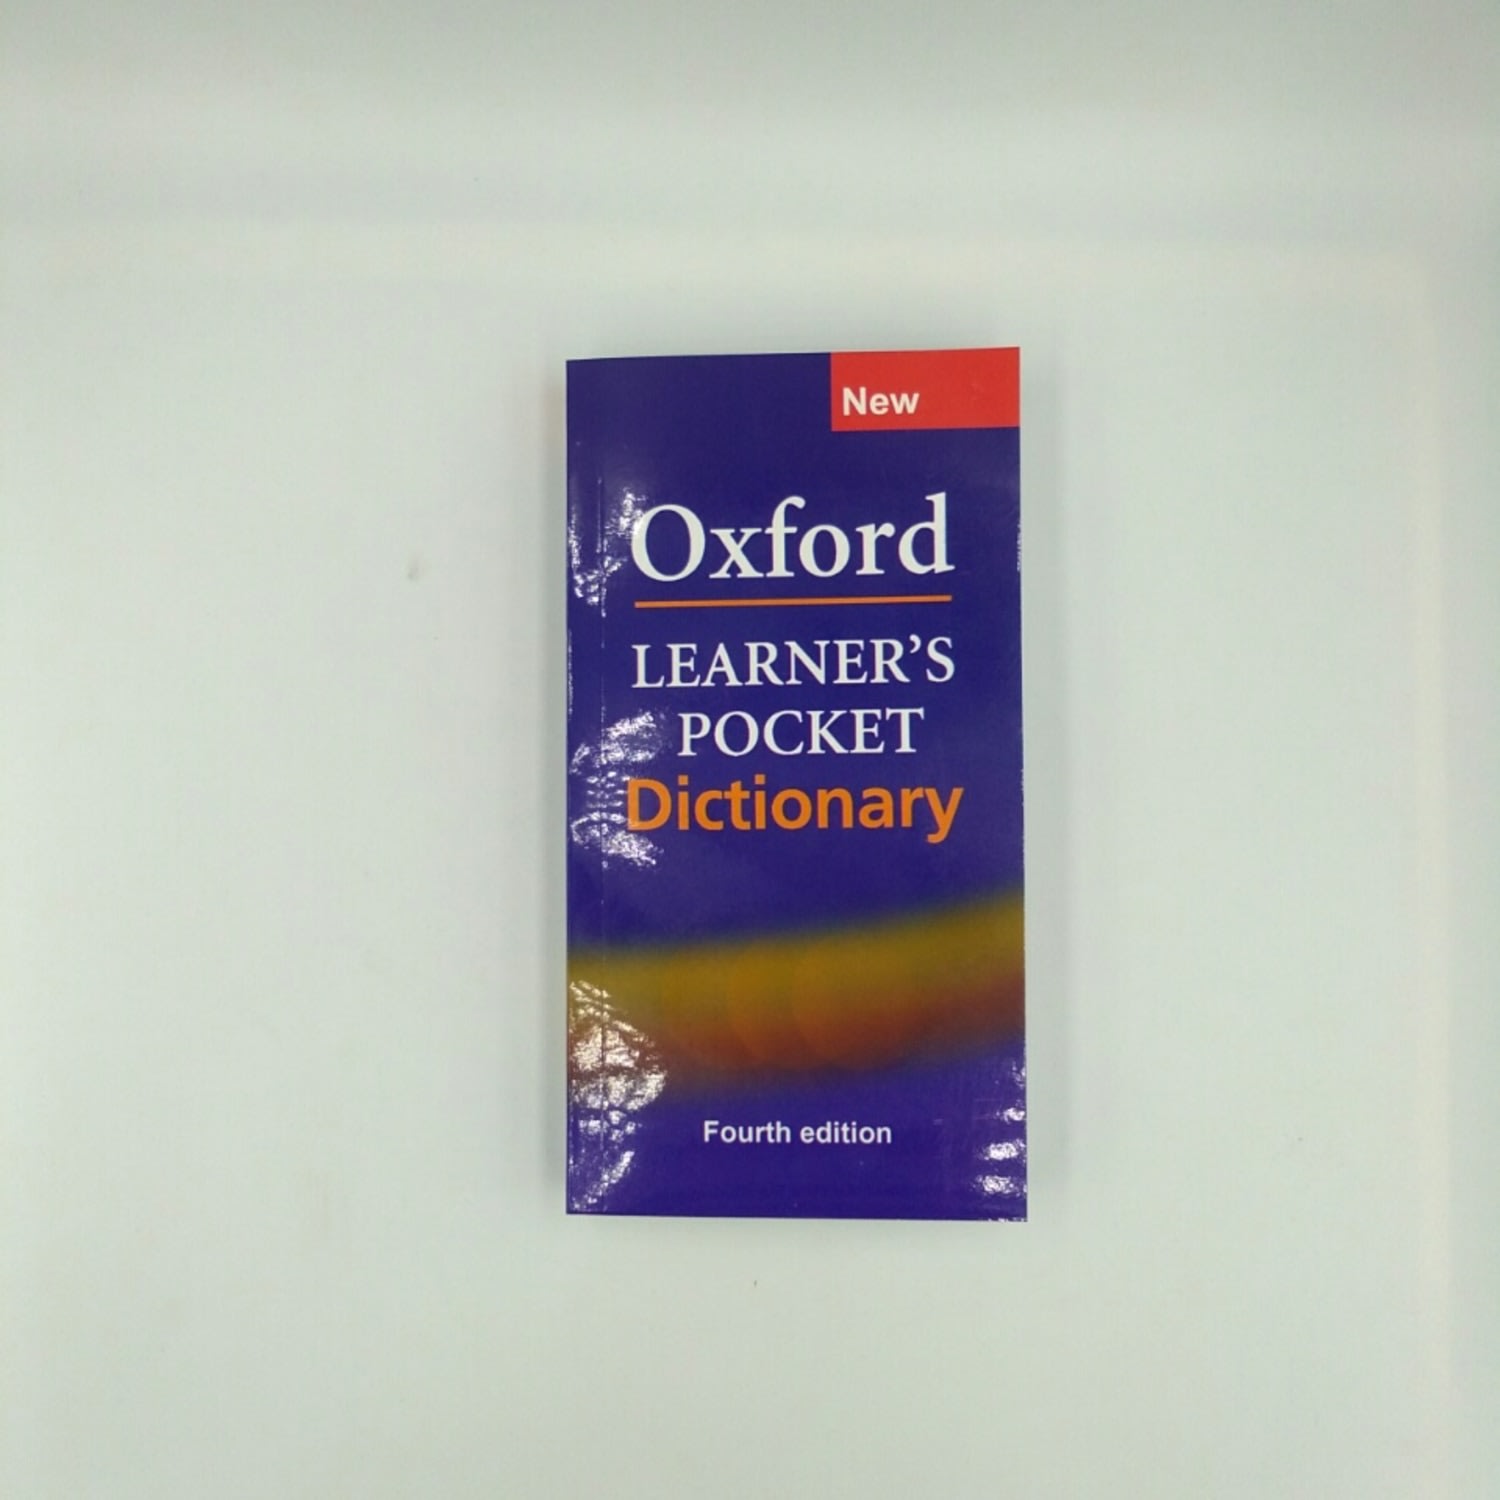 Oxford Learner's Pocket Dictionary | Golden Tiger Stationery Store